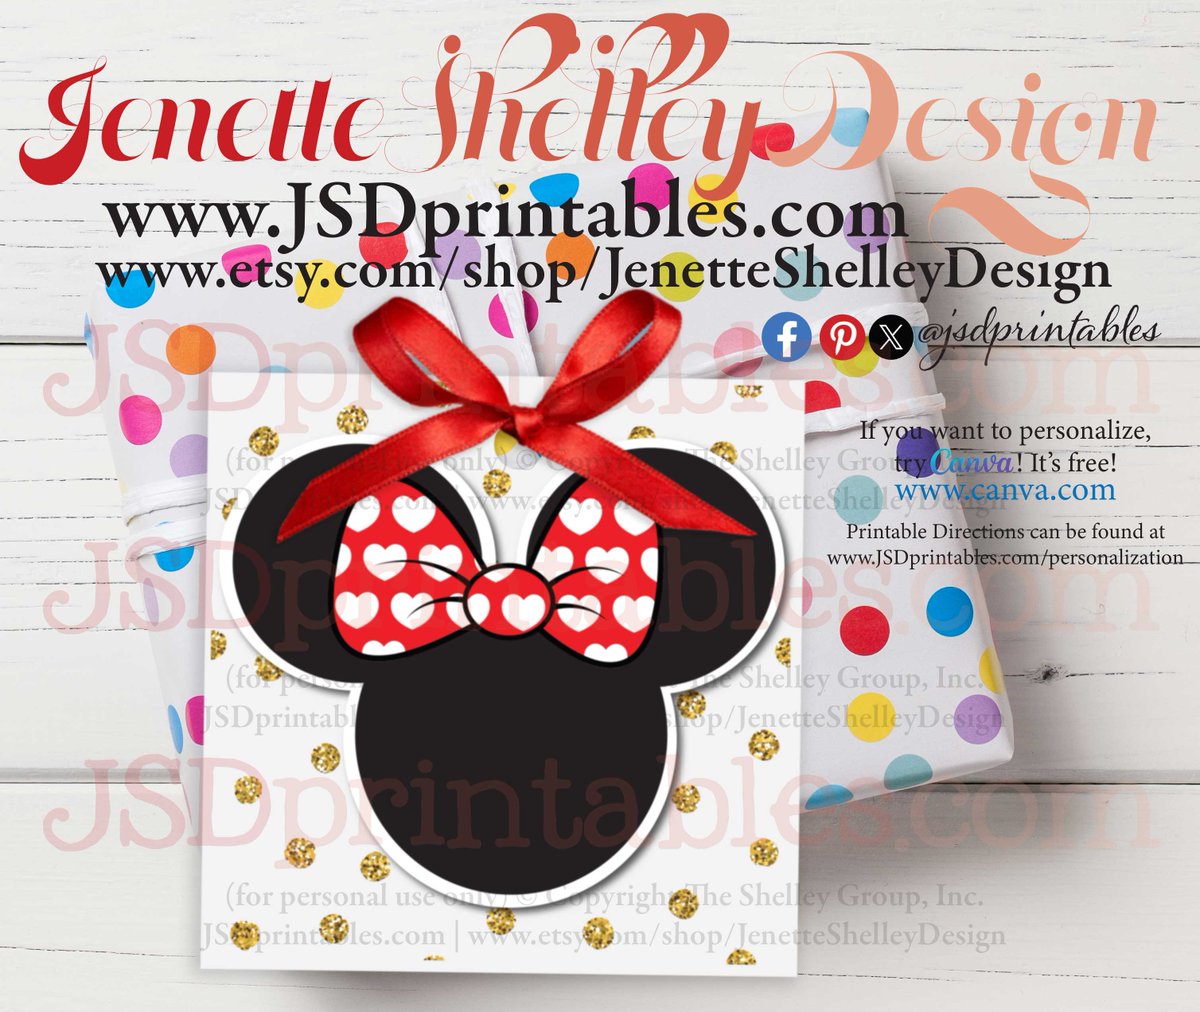 jsdprintables.com/product-page/m… Add a touch of Disney inspiration and magic to your gifts with our Mouse Ears Printable Digital Gift Tags. @jsdprintables #printables #shopsmall #gifts #gifttags #instantdownload #disneyinspiration #disney